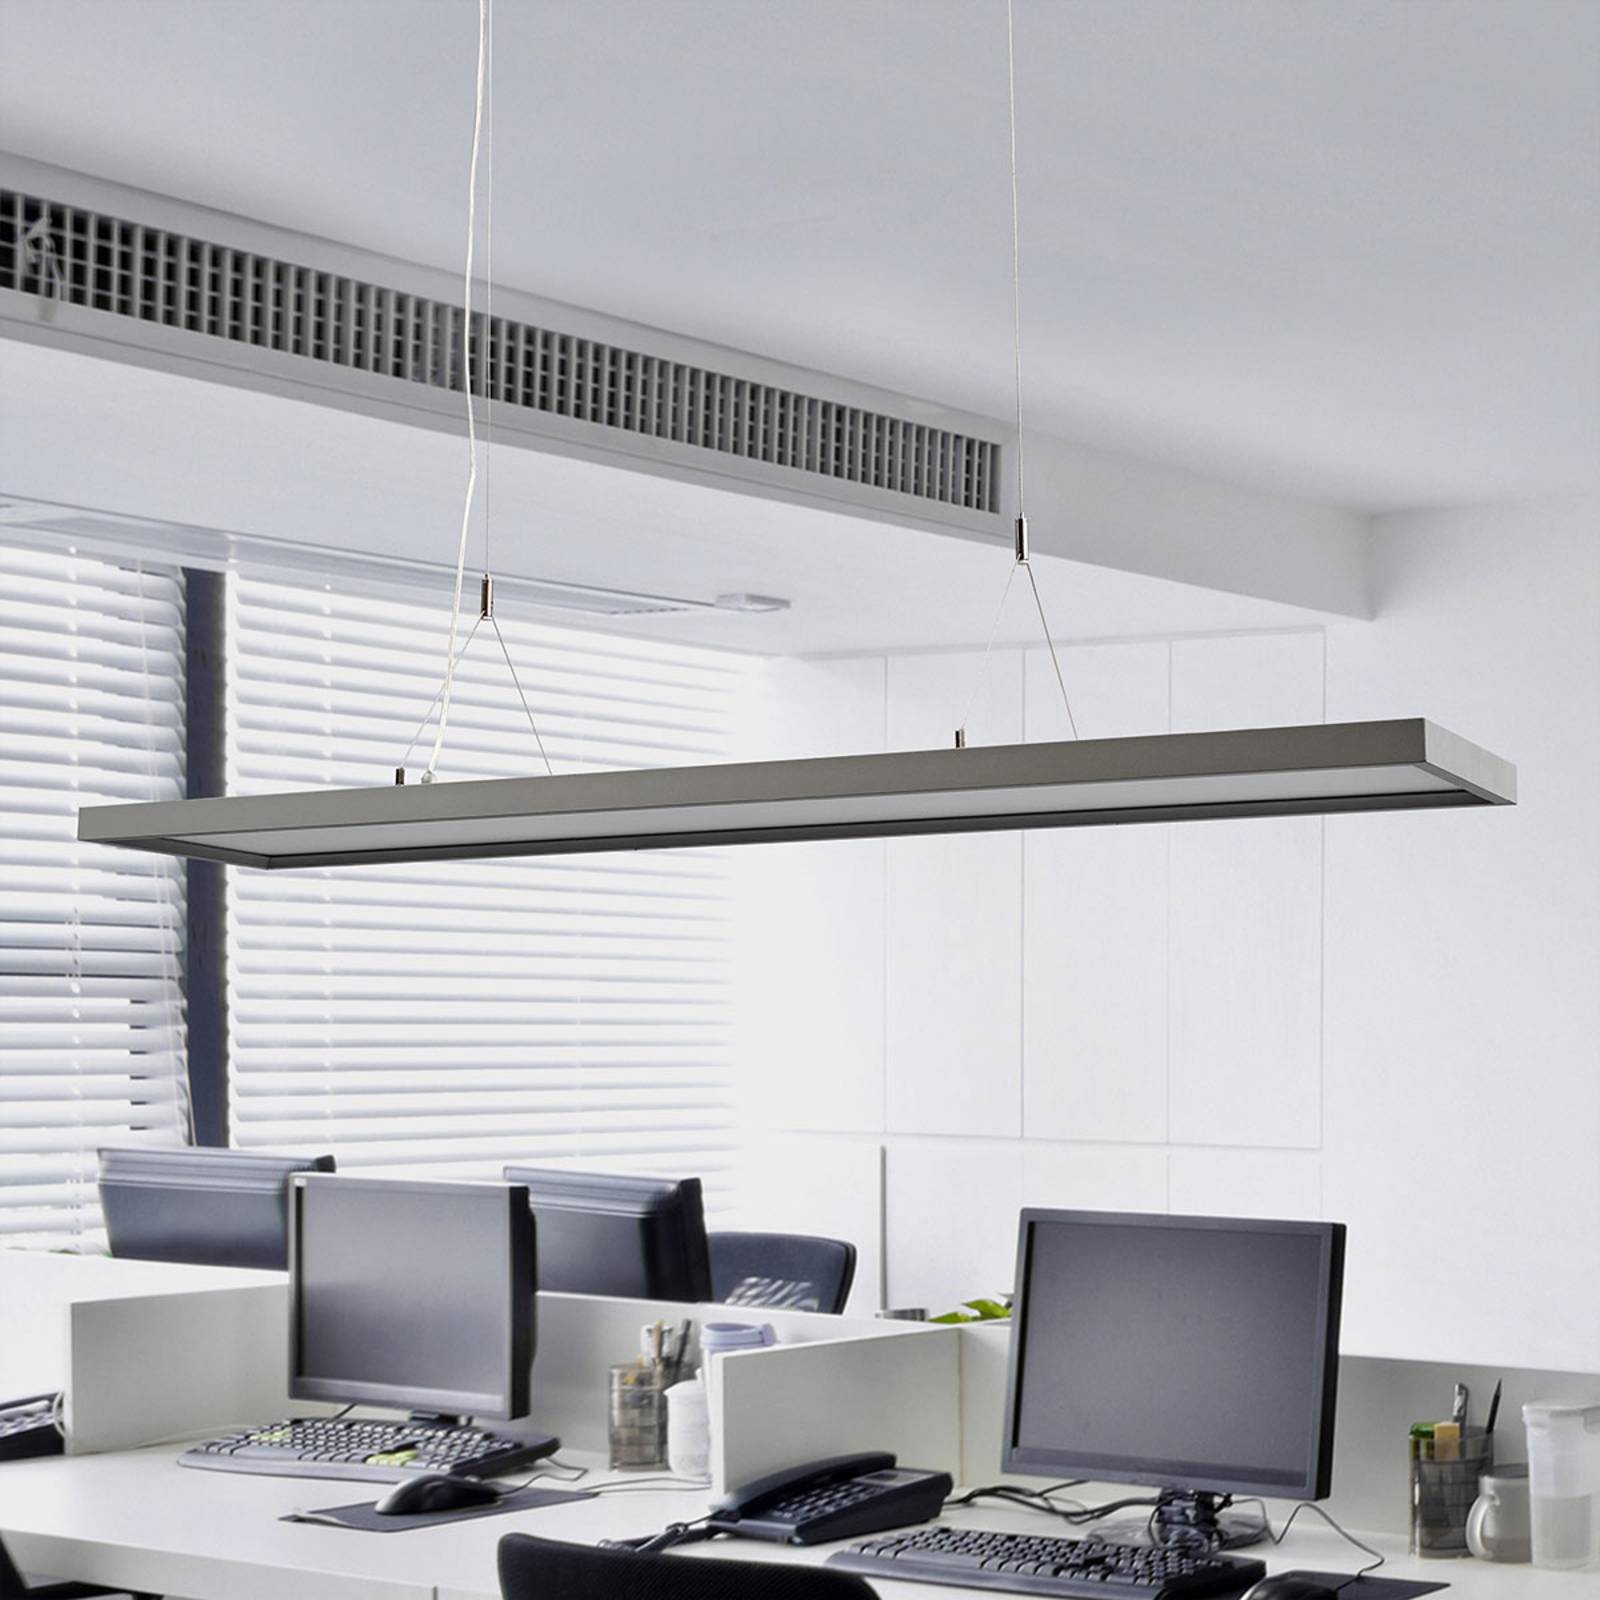 Photos - Chandelier / Lamp Arcchio Dimmable LED office hanging light Divia 